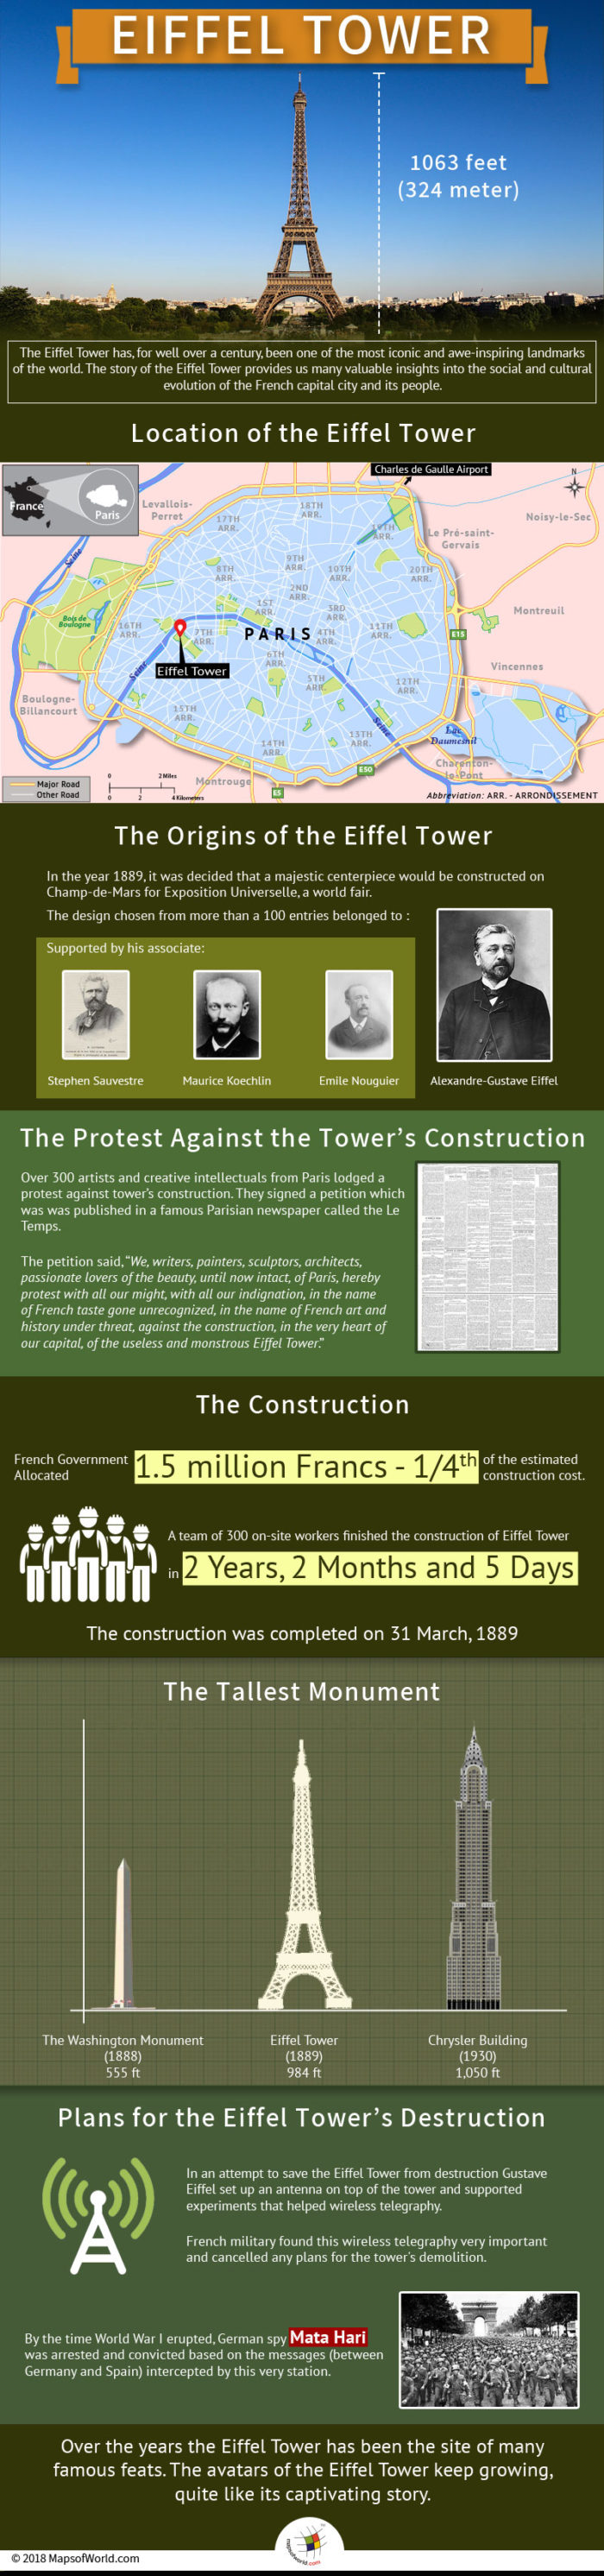 Infographic elaborating the story of the Eiffel Tower